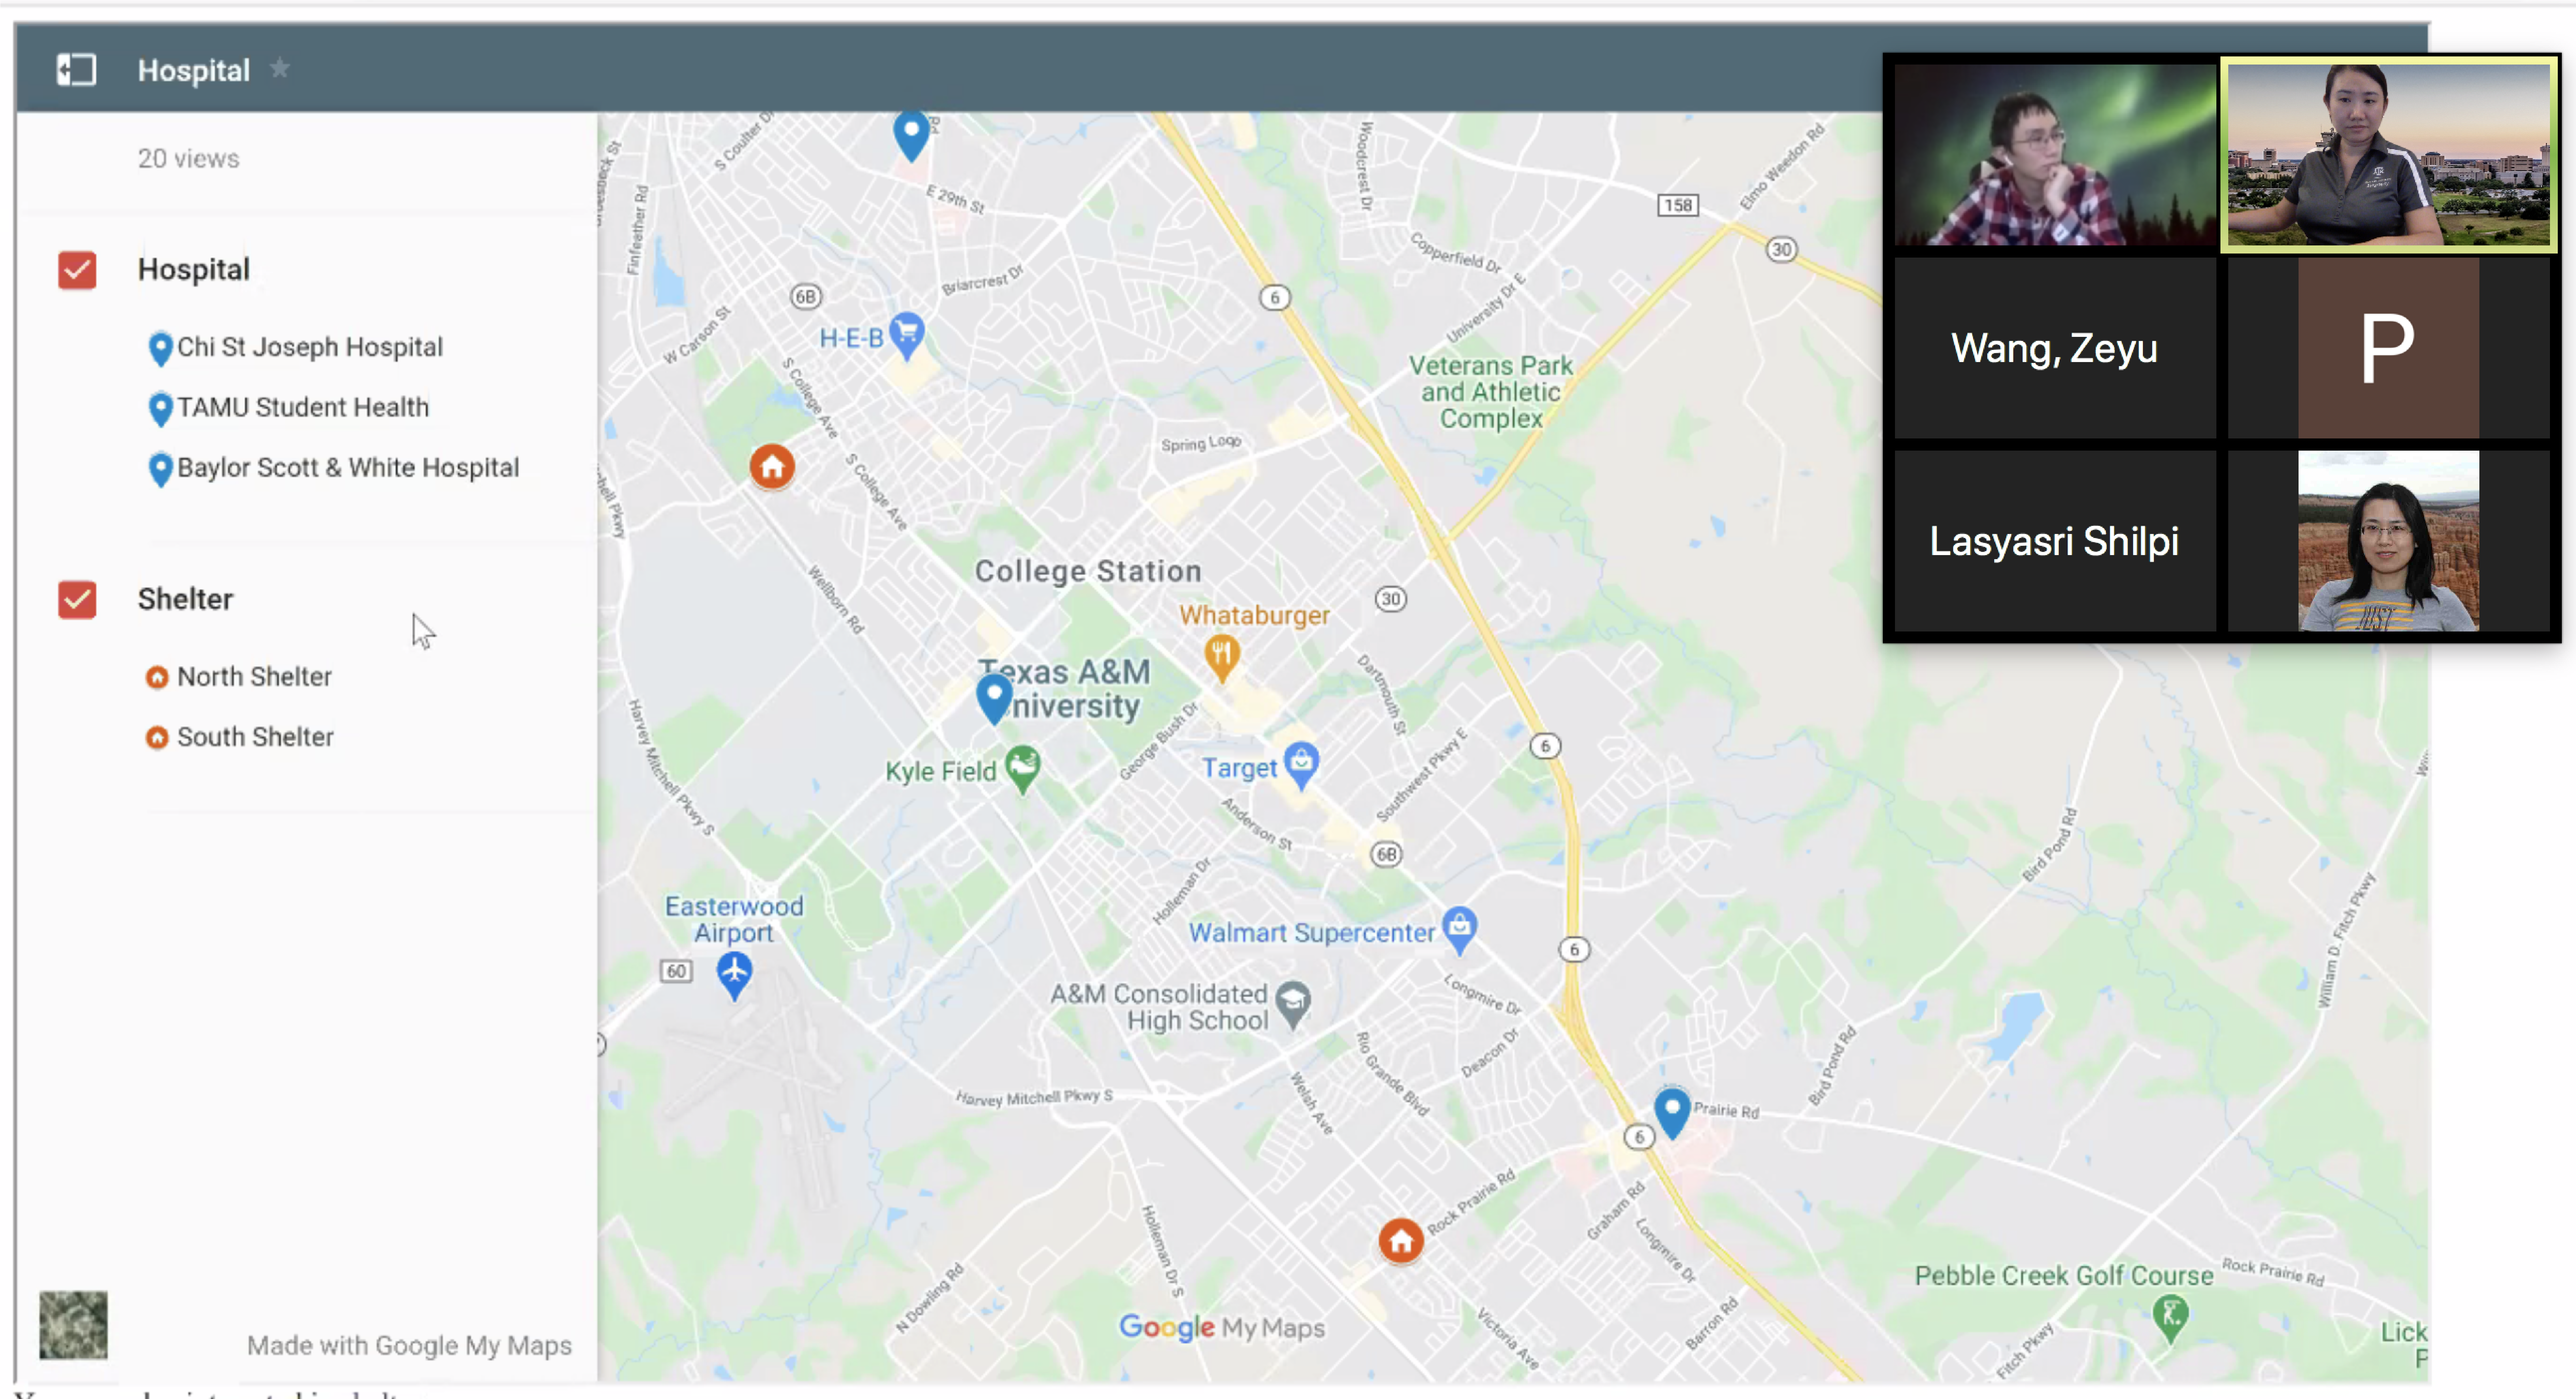 Screenshot of Zoom Meeting showing thumbnails of people's photos and map of College Station